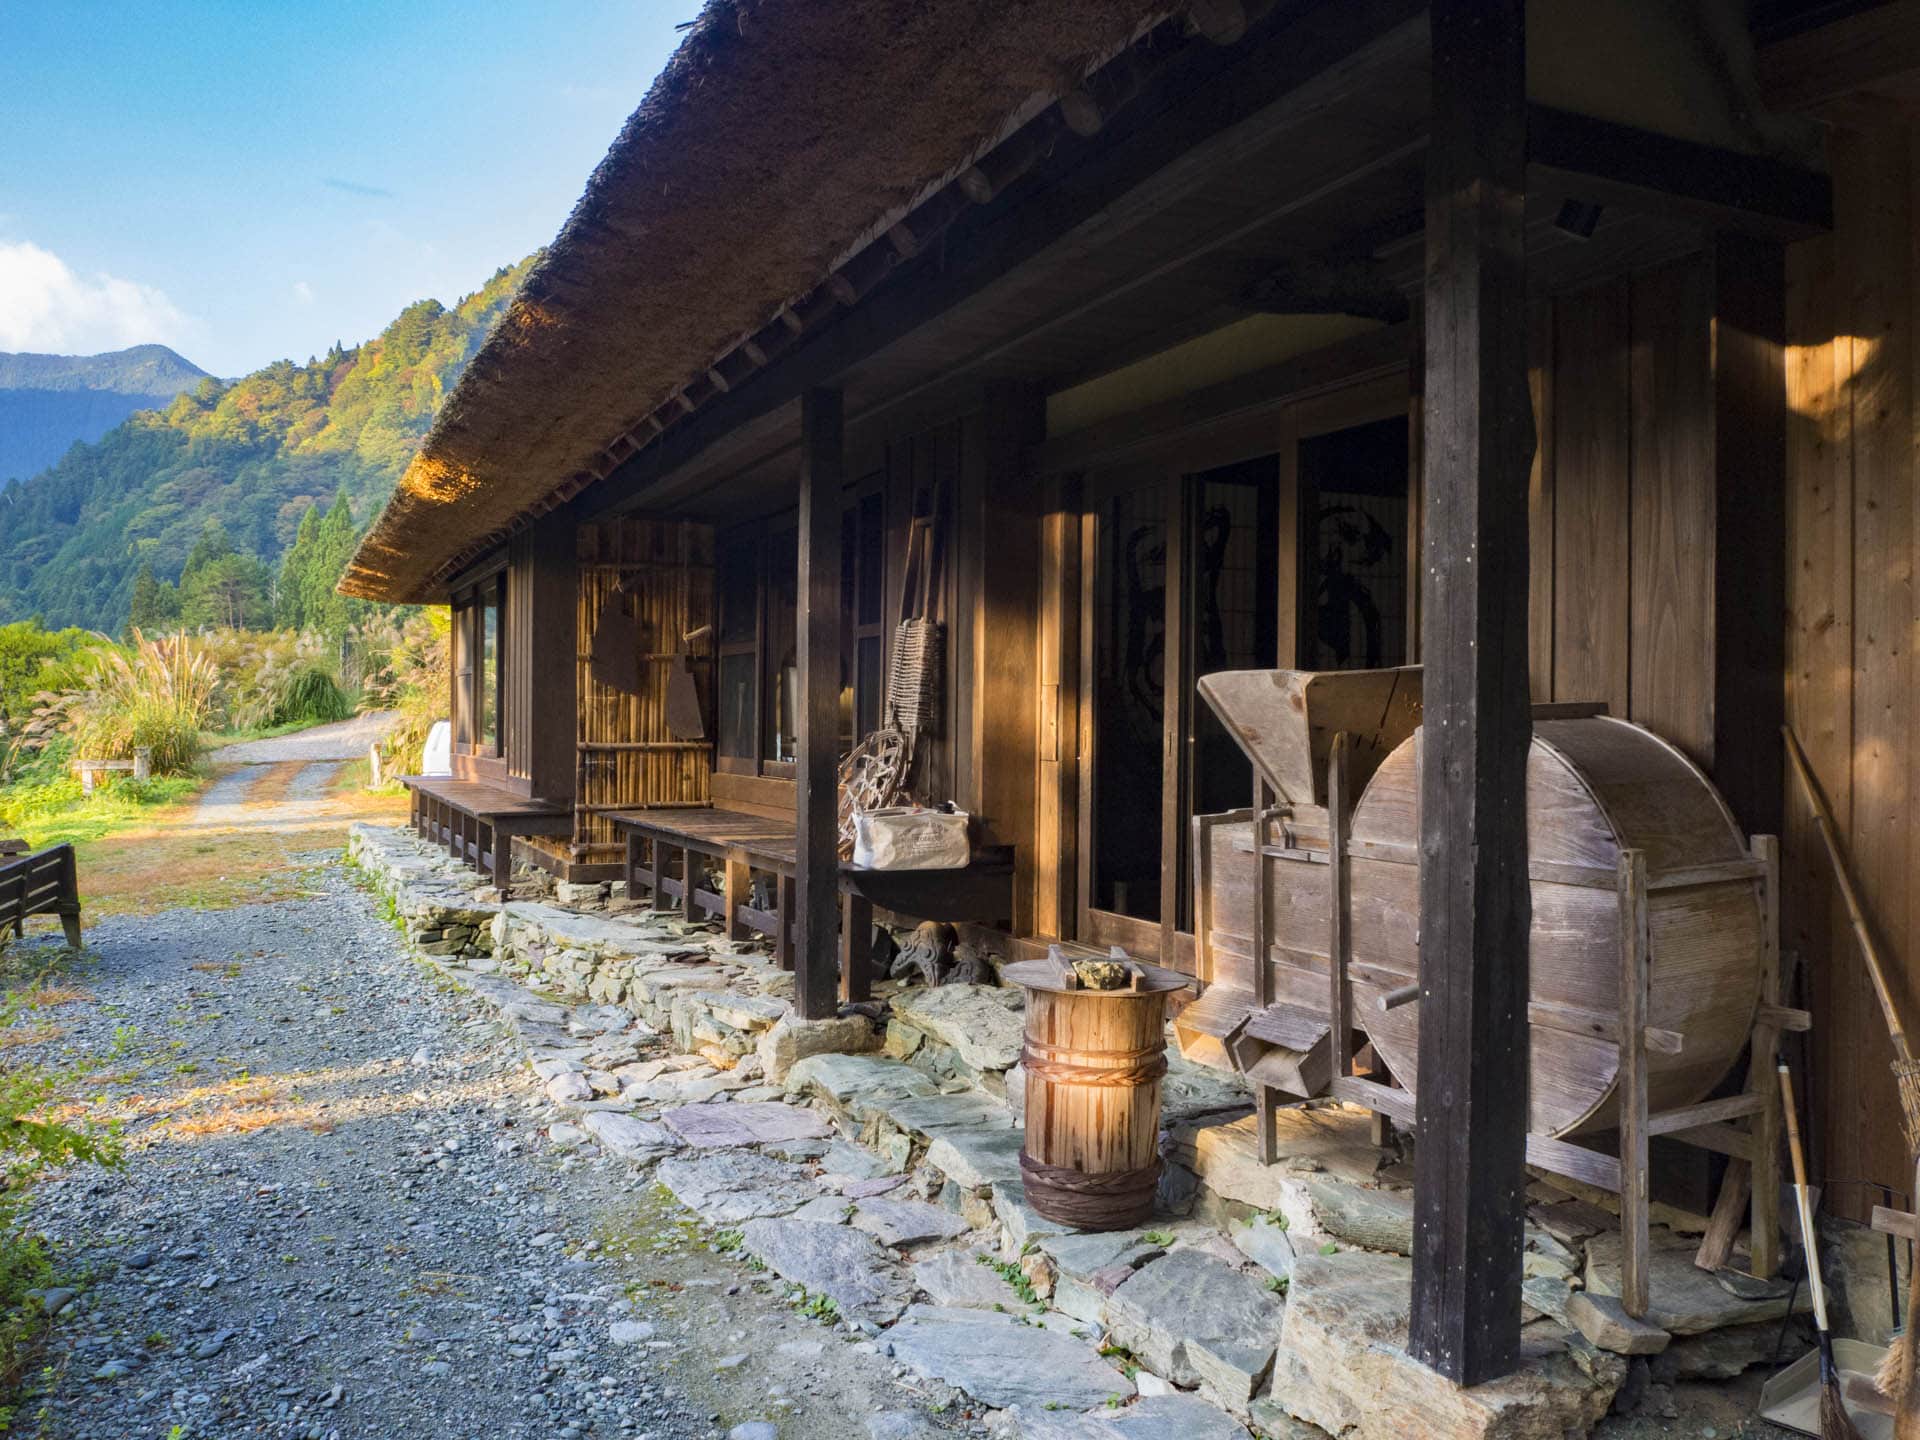 A three-hundred-year-old traditional Japanese farmhouse, ours for three nights with Lynn and Ward